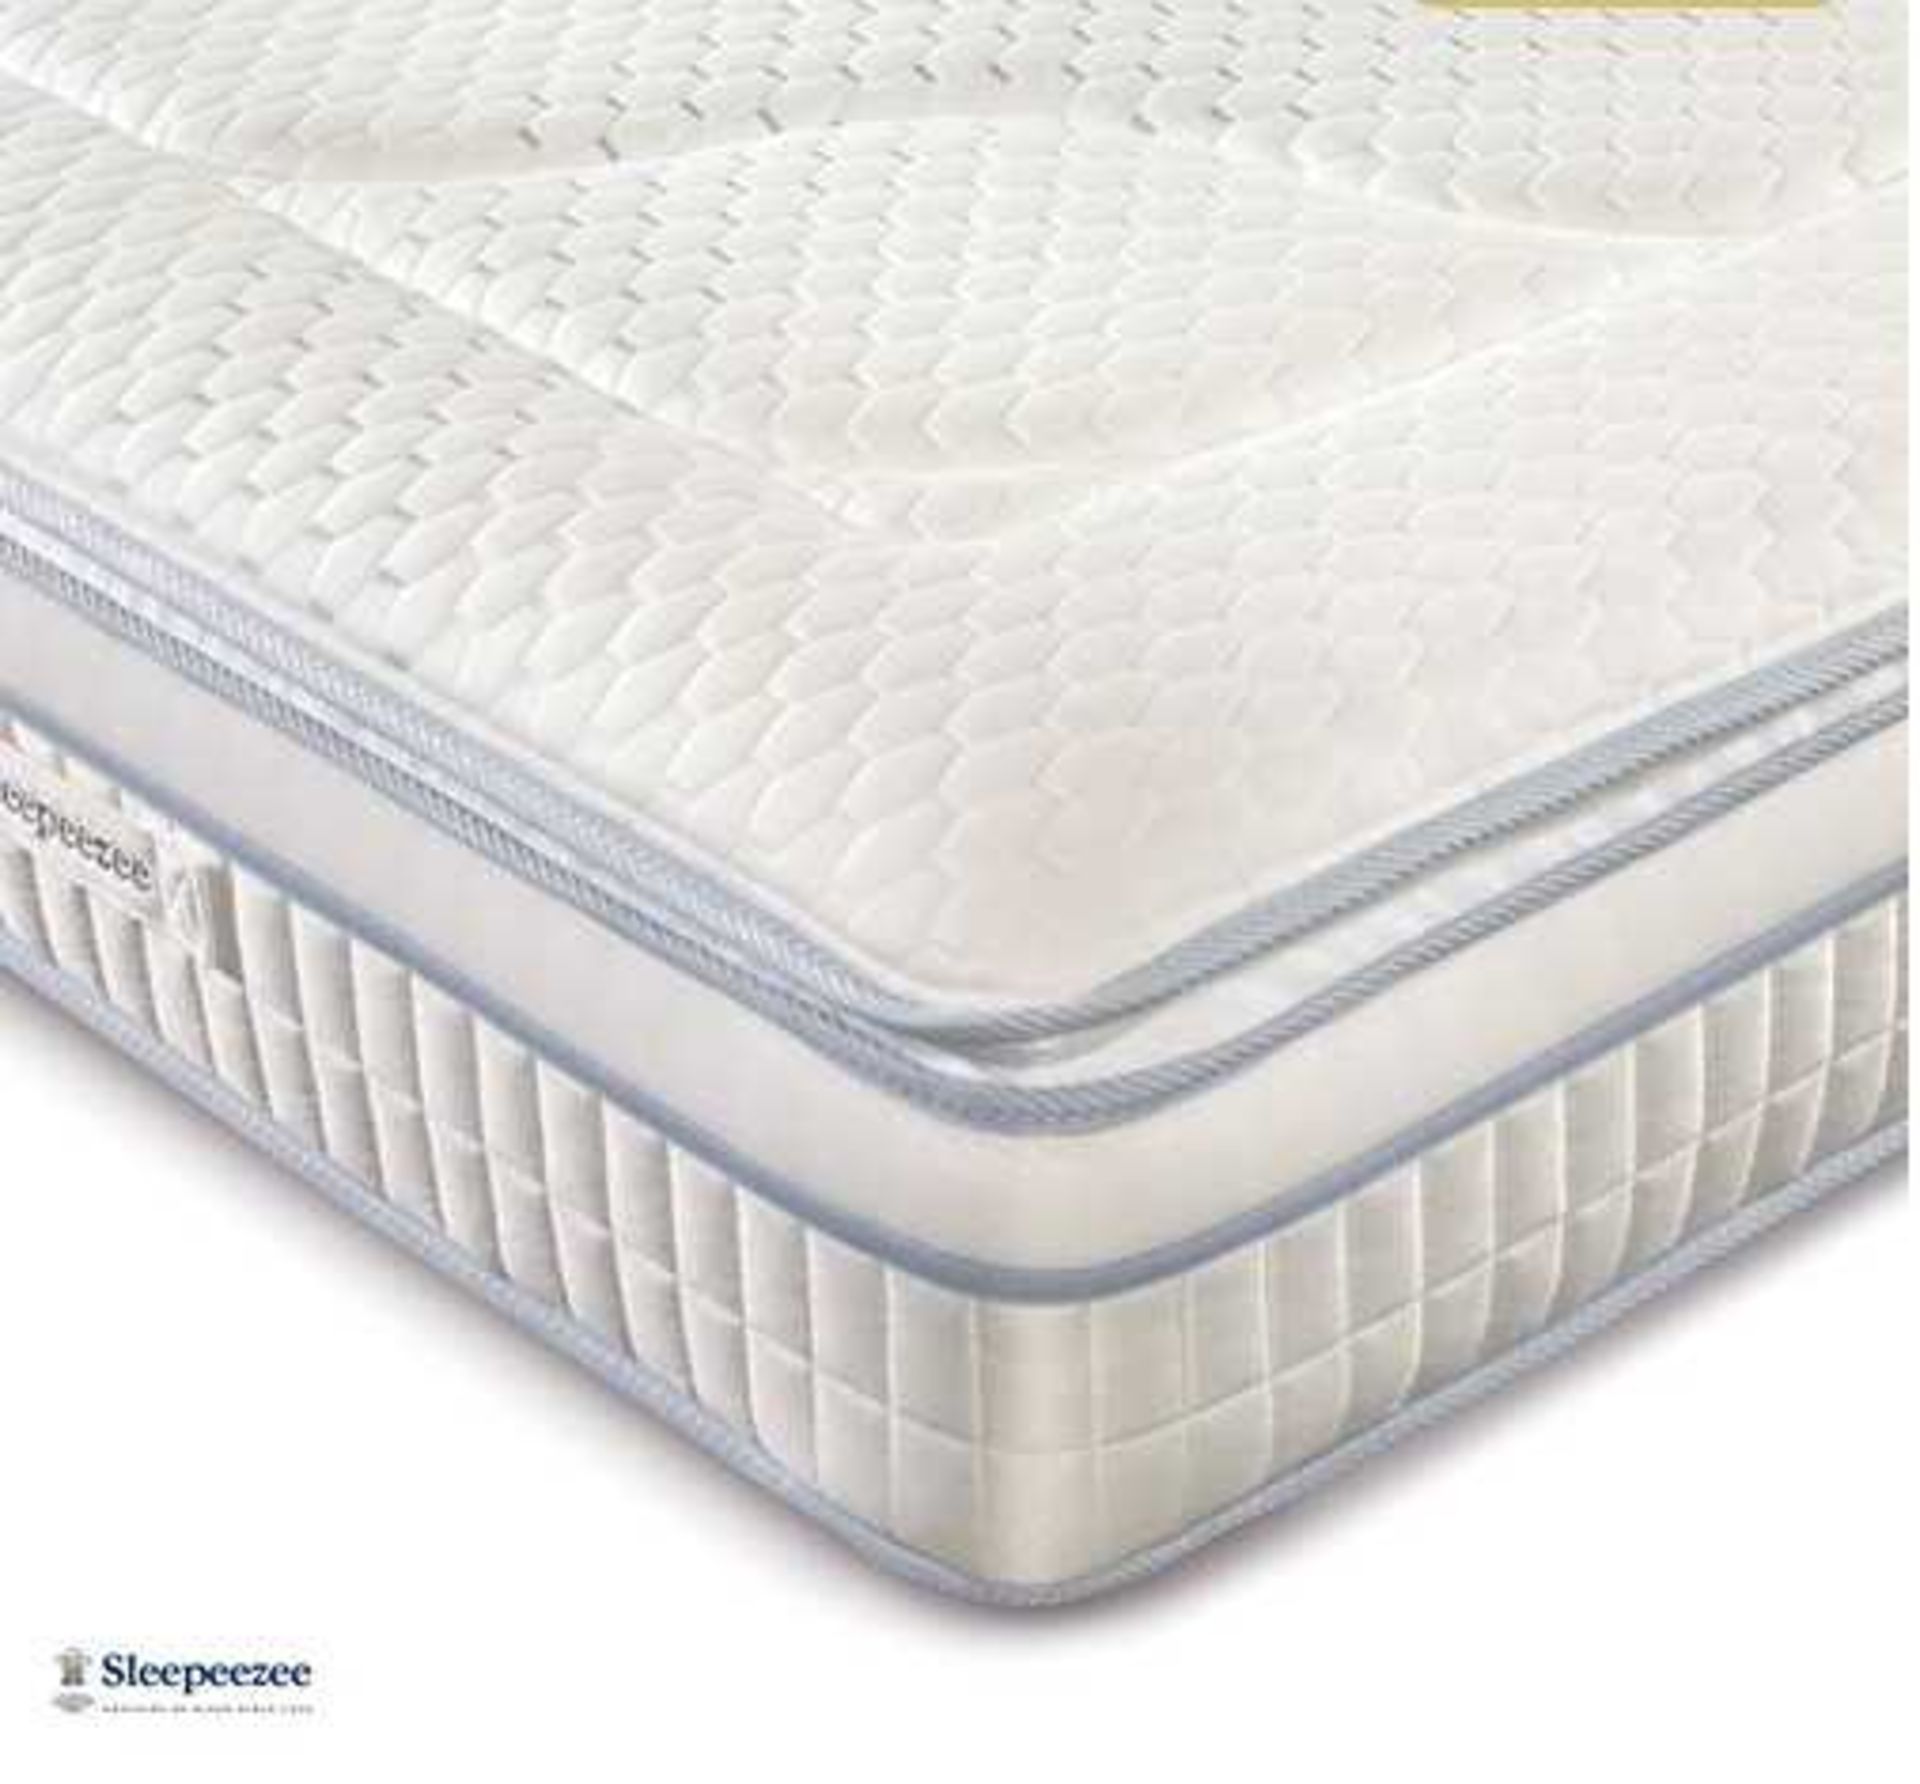 | 1X | SLEEPRIGHT SILENTNIGHT ORCHID 1200 SINGLE 3FT 90CM MATTRESS | DIRTY MARKS PRESENT DUE TO NO